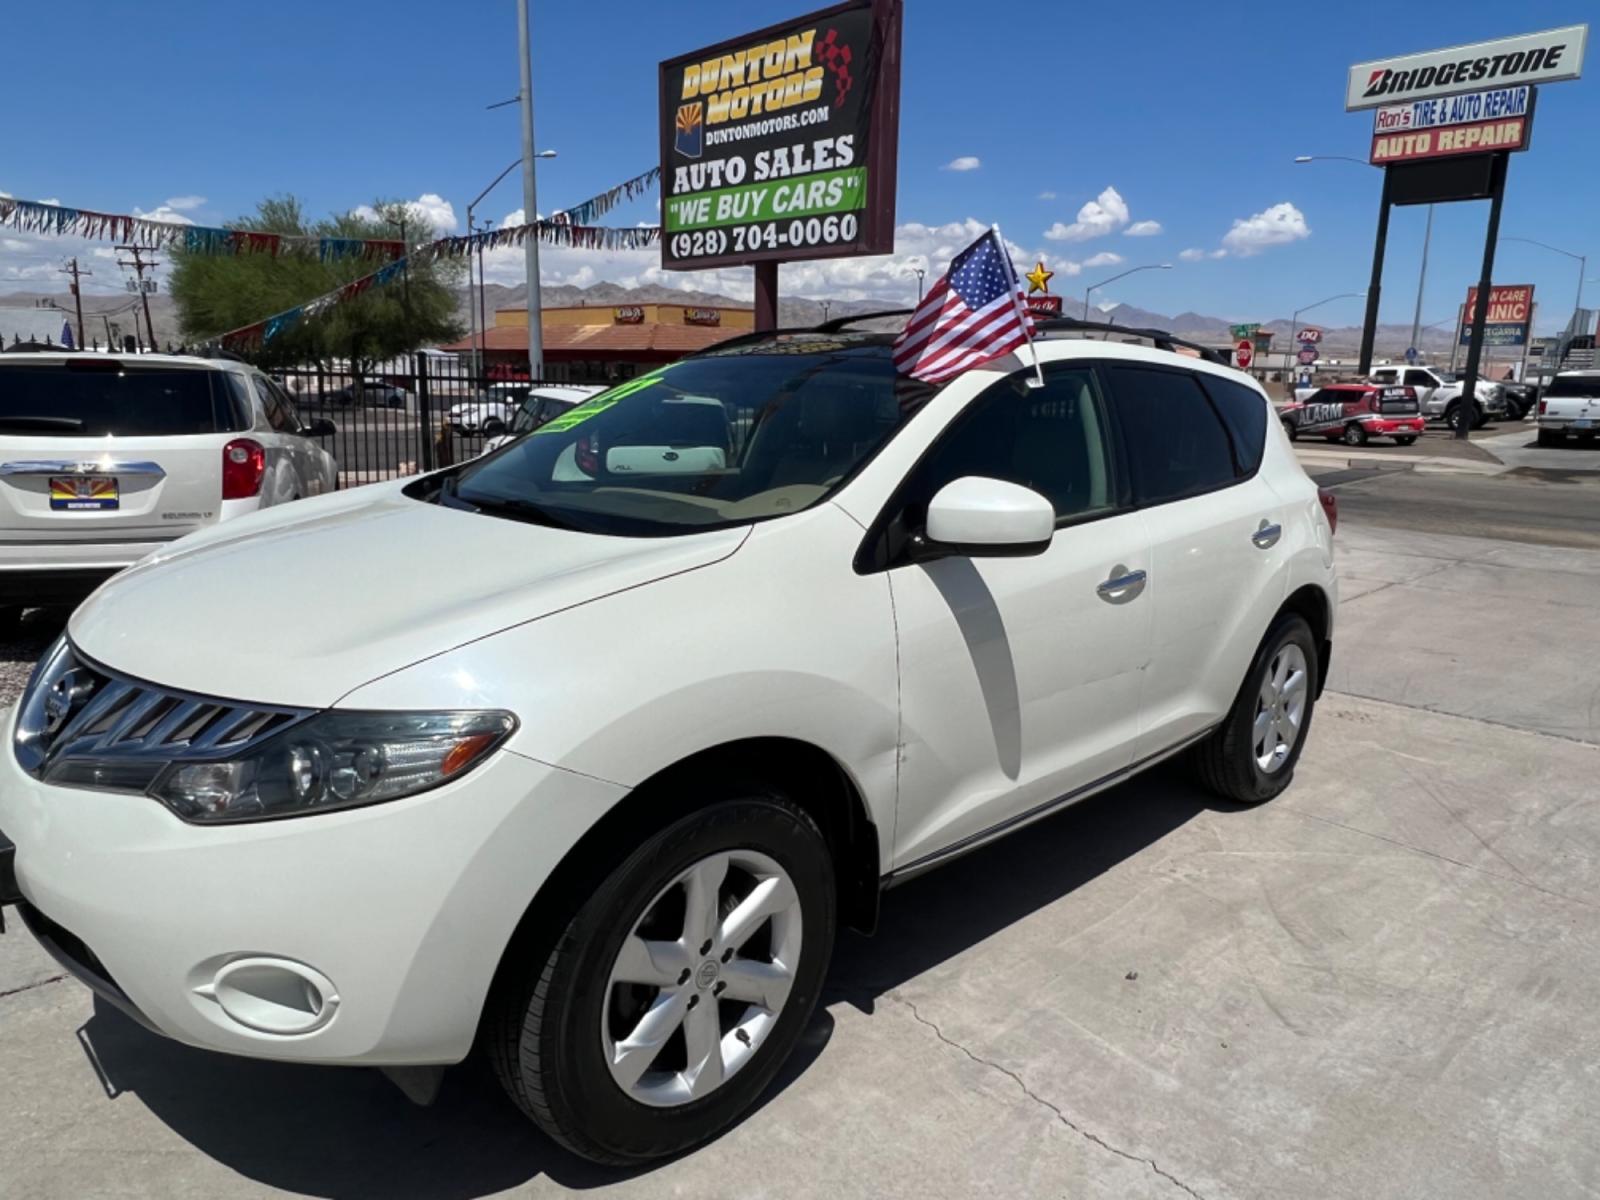 2009 White Nissan Murano , located at 2190 Hwy 95, Bullhead City, AZ, 86442, (928) 704-0060, 0.000000, 0.000000 - 2009 Nissan Murano. All Wheel Drive. Leather, dual panoramic moonroofs, backup camera. heated seats. In-house financing available. We finance. Buy Here Pay Here. 127242 miles. 3.5 V6. - Photo #2